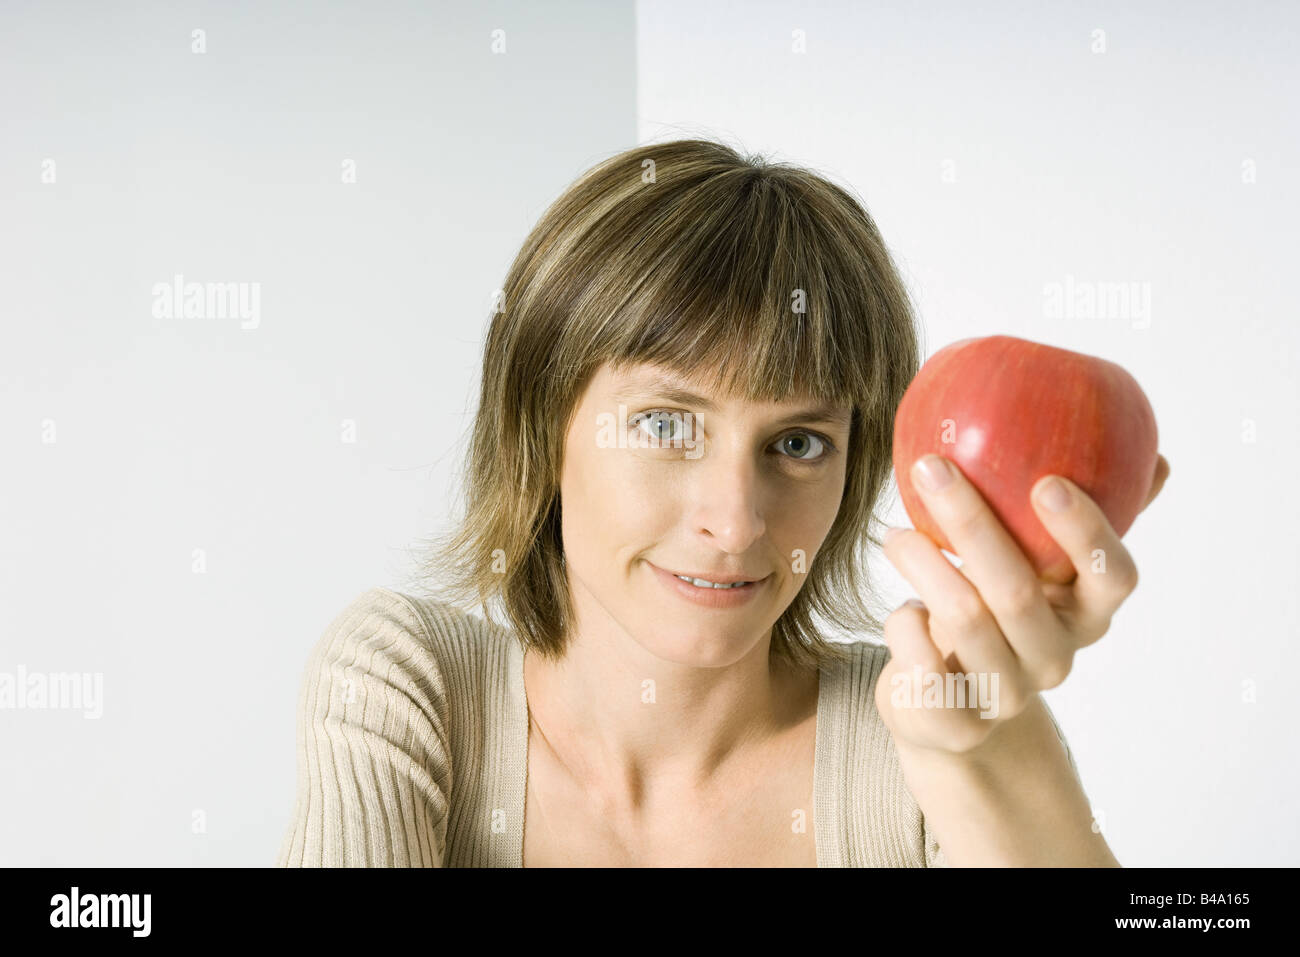 Woman holding red apple, smiling at camera Banque D'Images